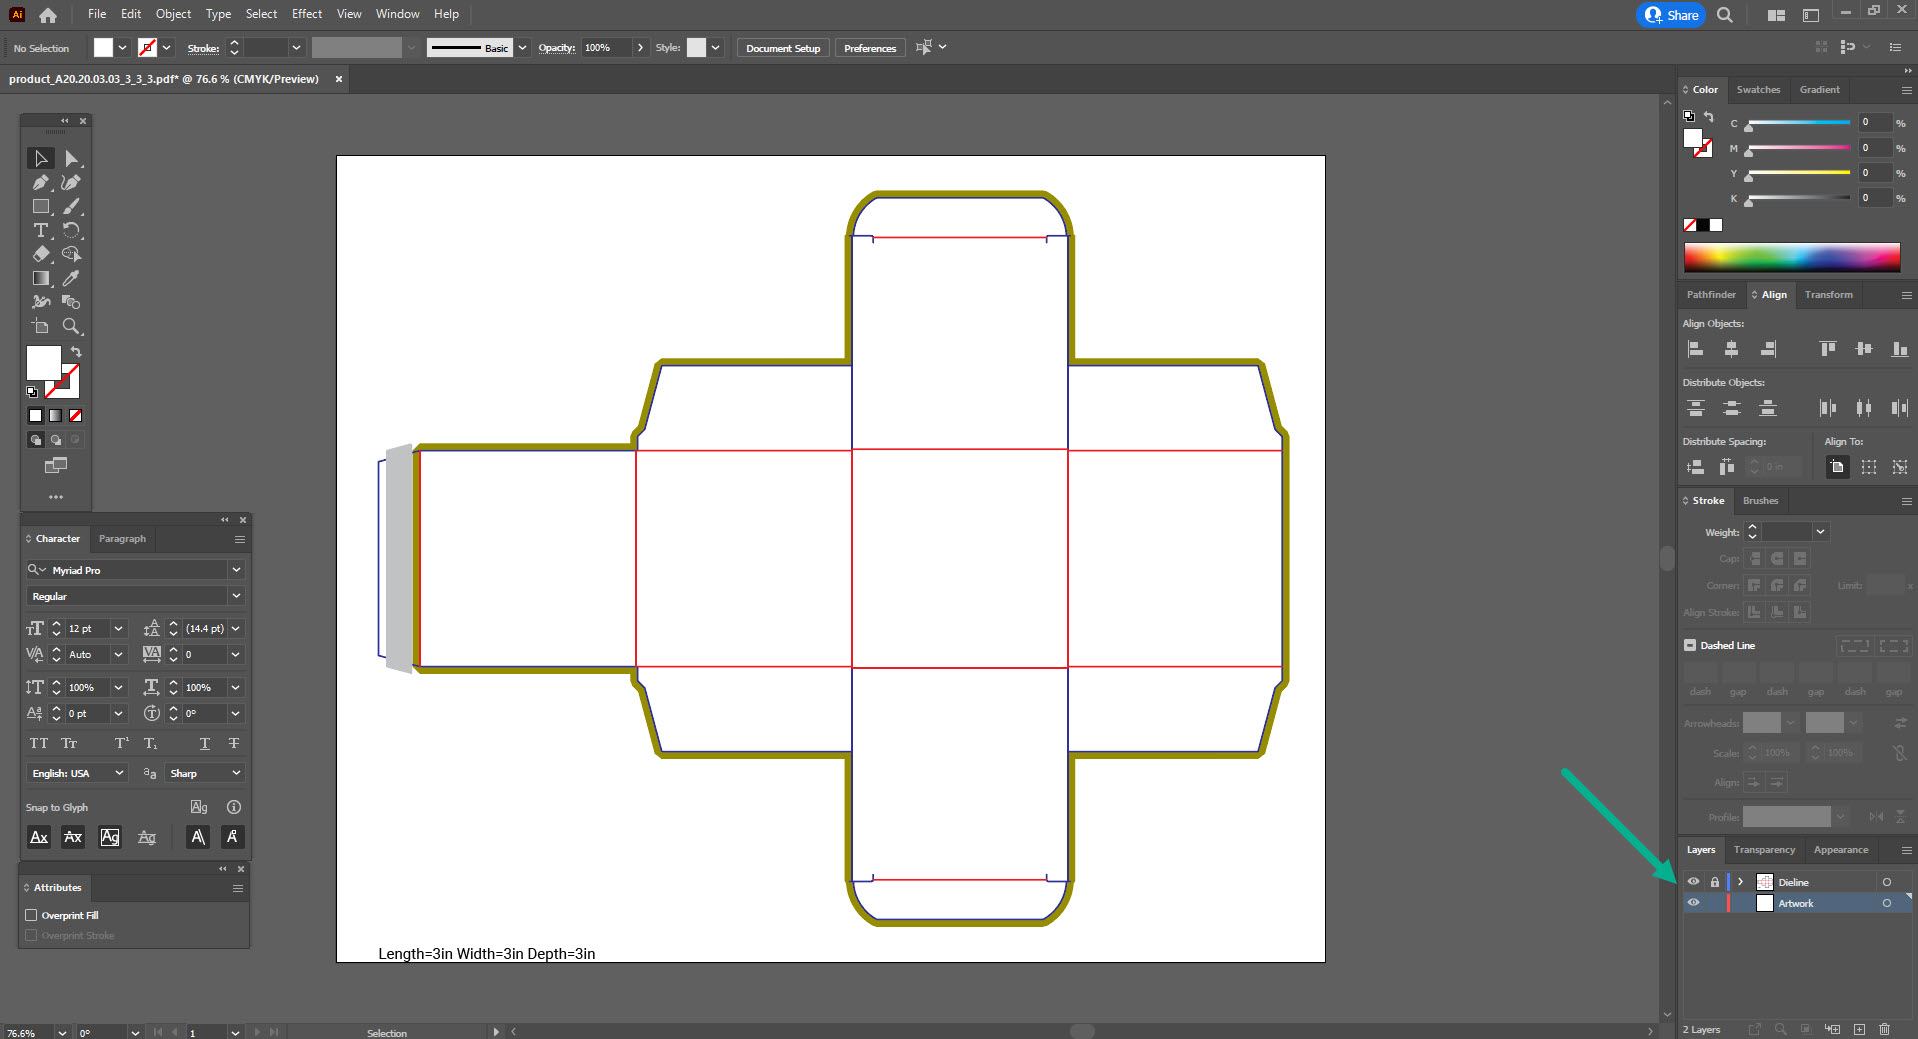 Adobe Express vs Canva, the screenshot of Adobe Illustrator showing two layers on a box design document.